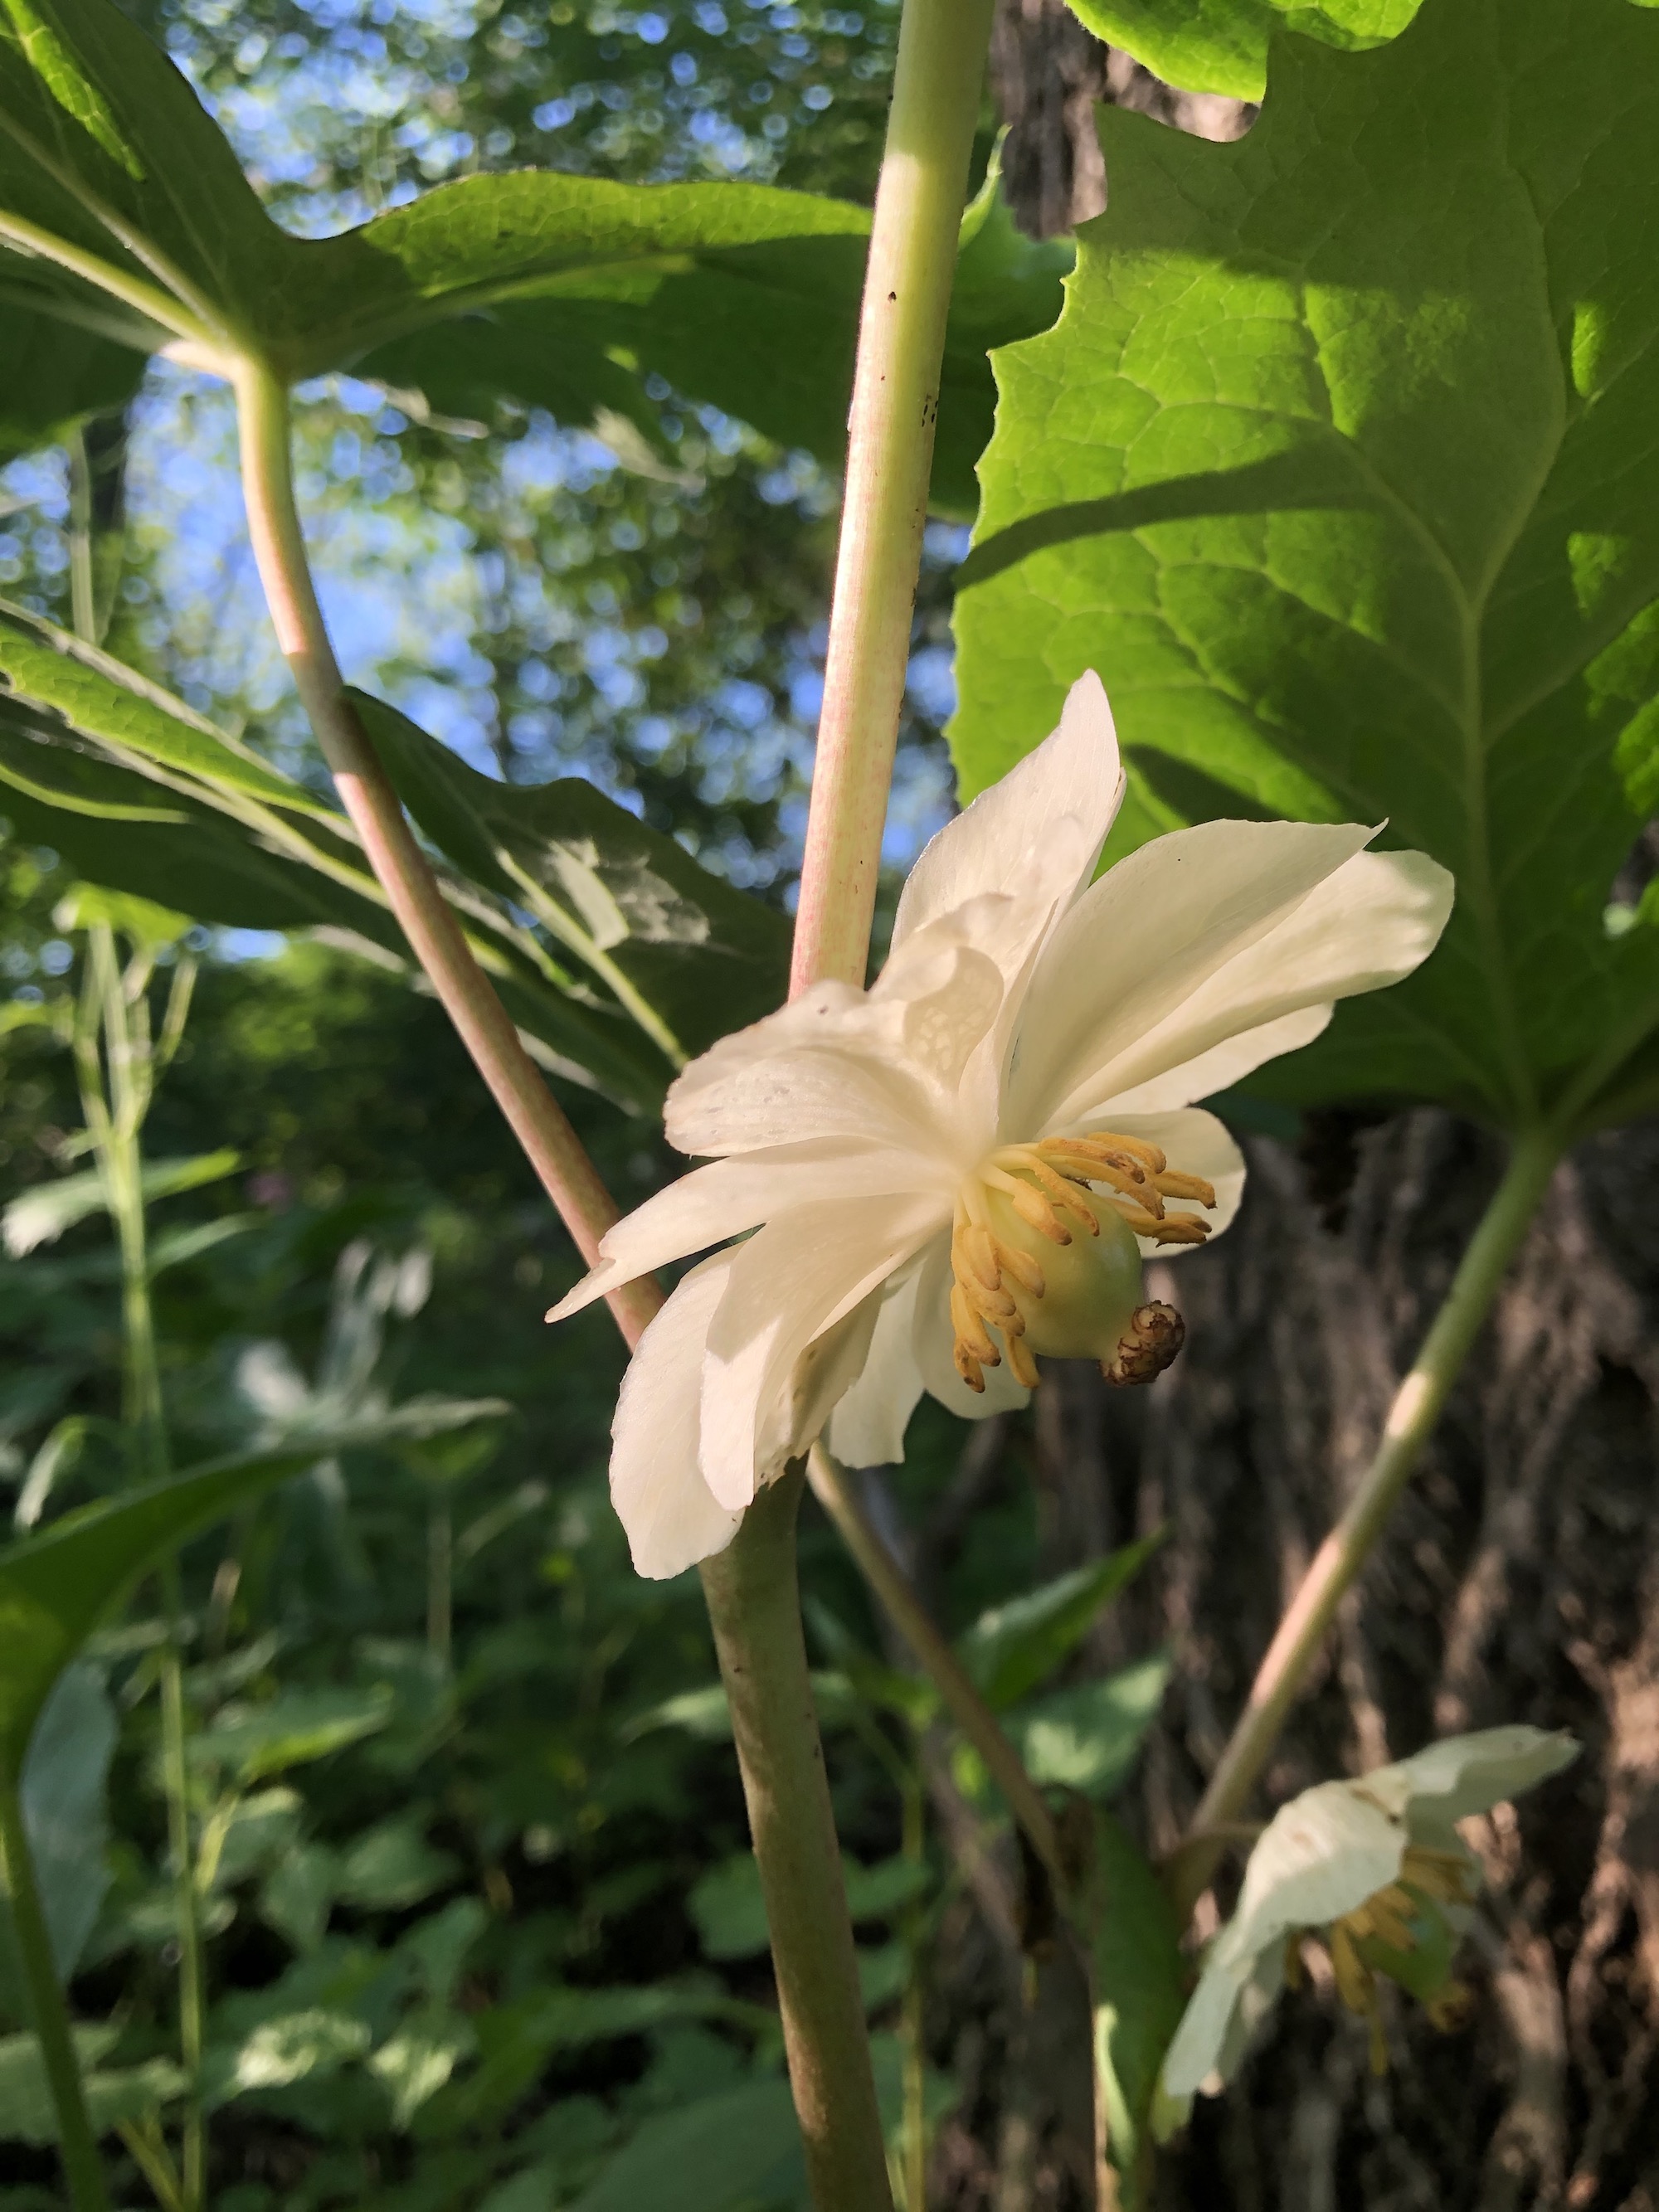 Mayapple blooms in wood between Duck Pond and Marion Dunn in Madison, Wisconsin on May 30, 2020.